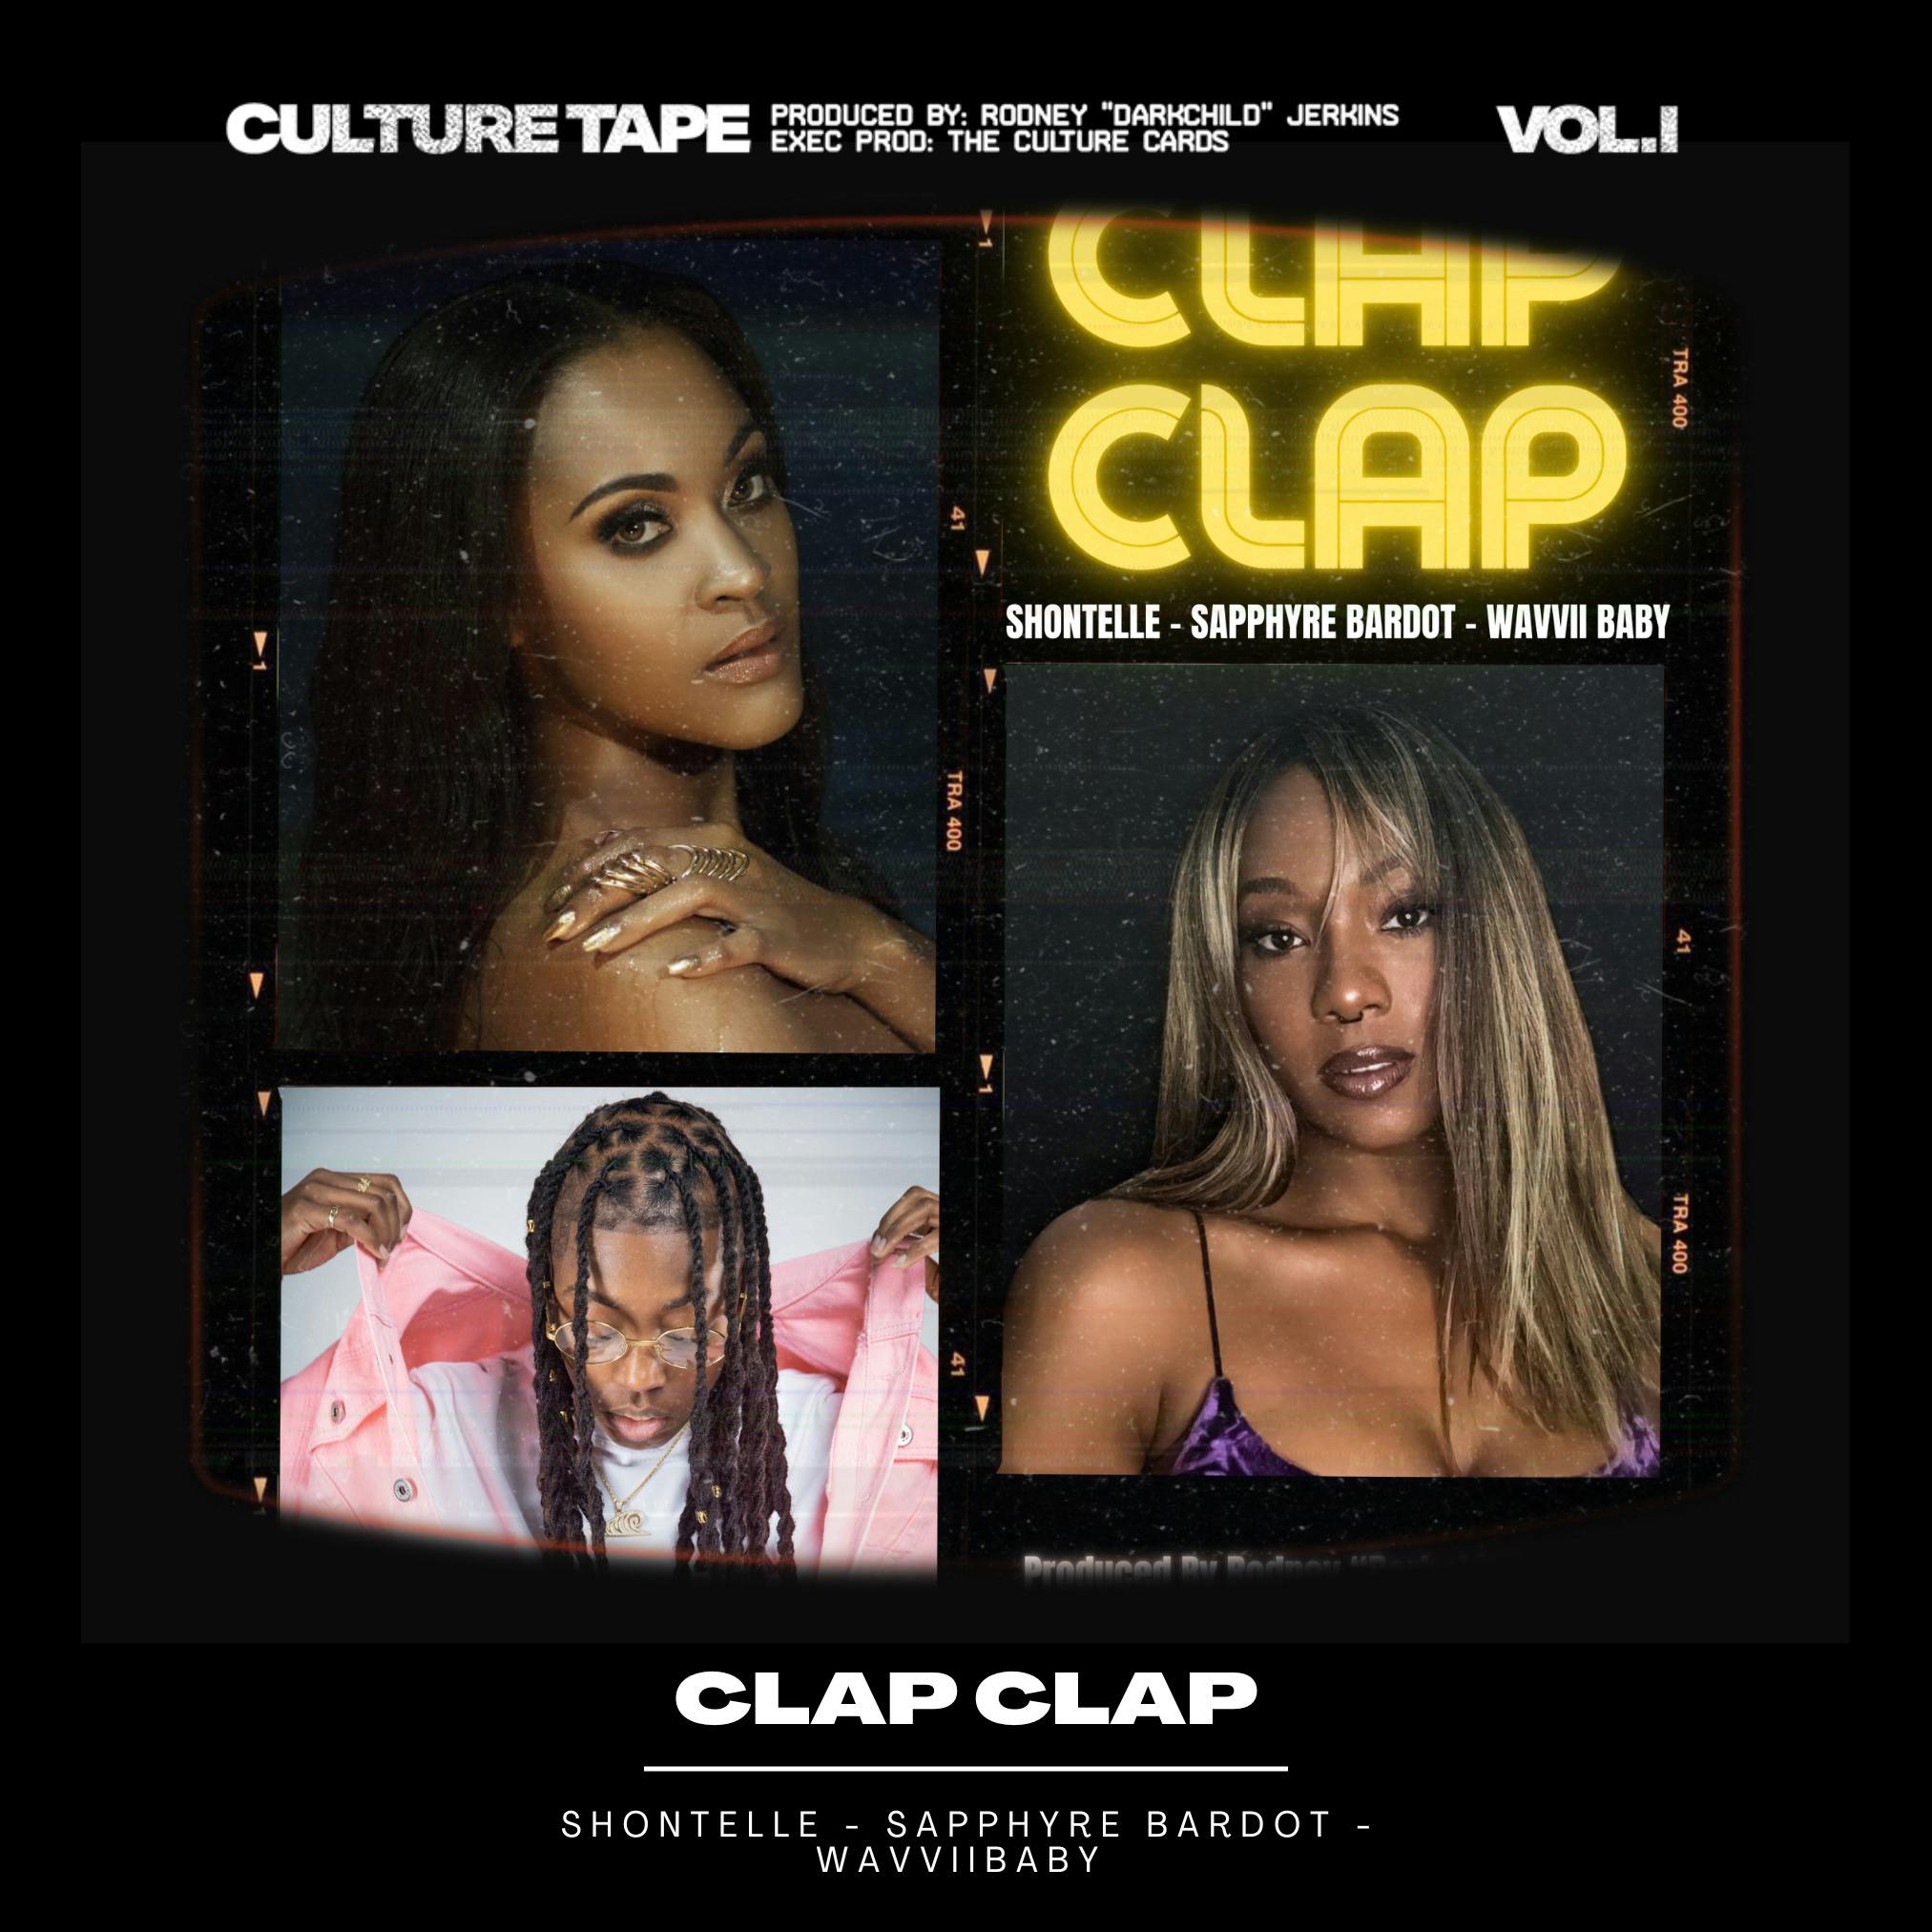 Clap Clap Feat. Shontelle, Sapphyre, and Wavvii